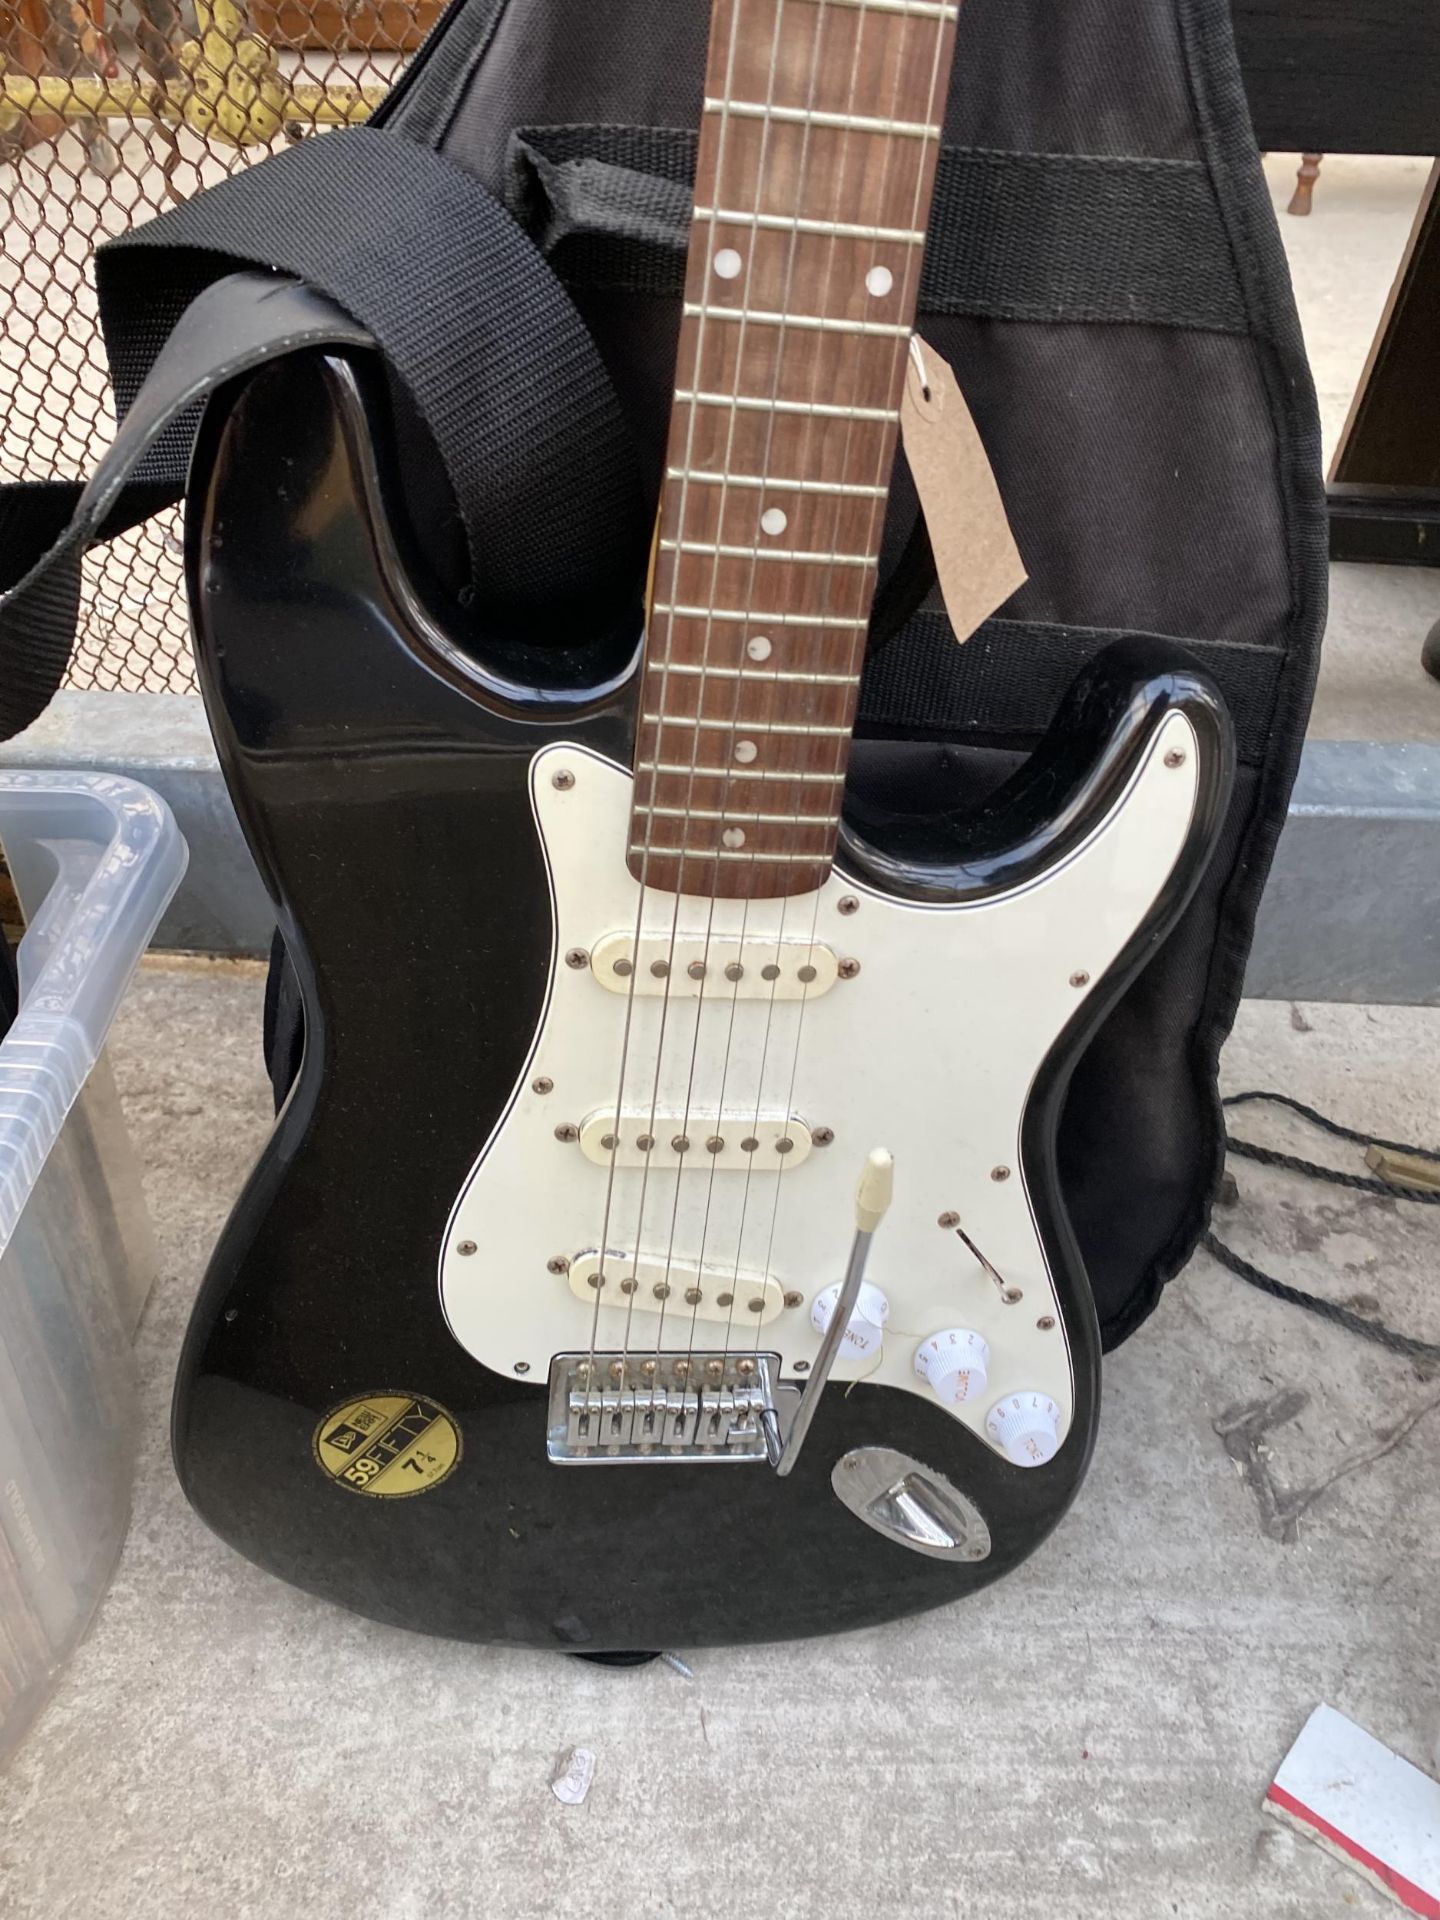 AN ENCORE ELECTRIC GUITAR AND CARRY CASE - Image 2 of 3